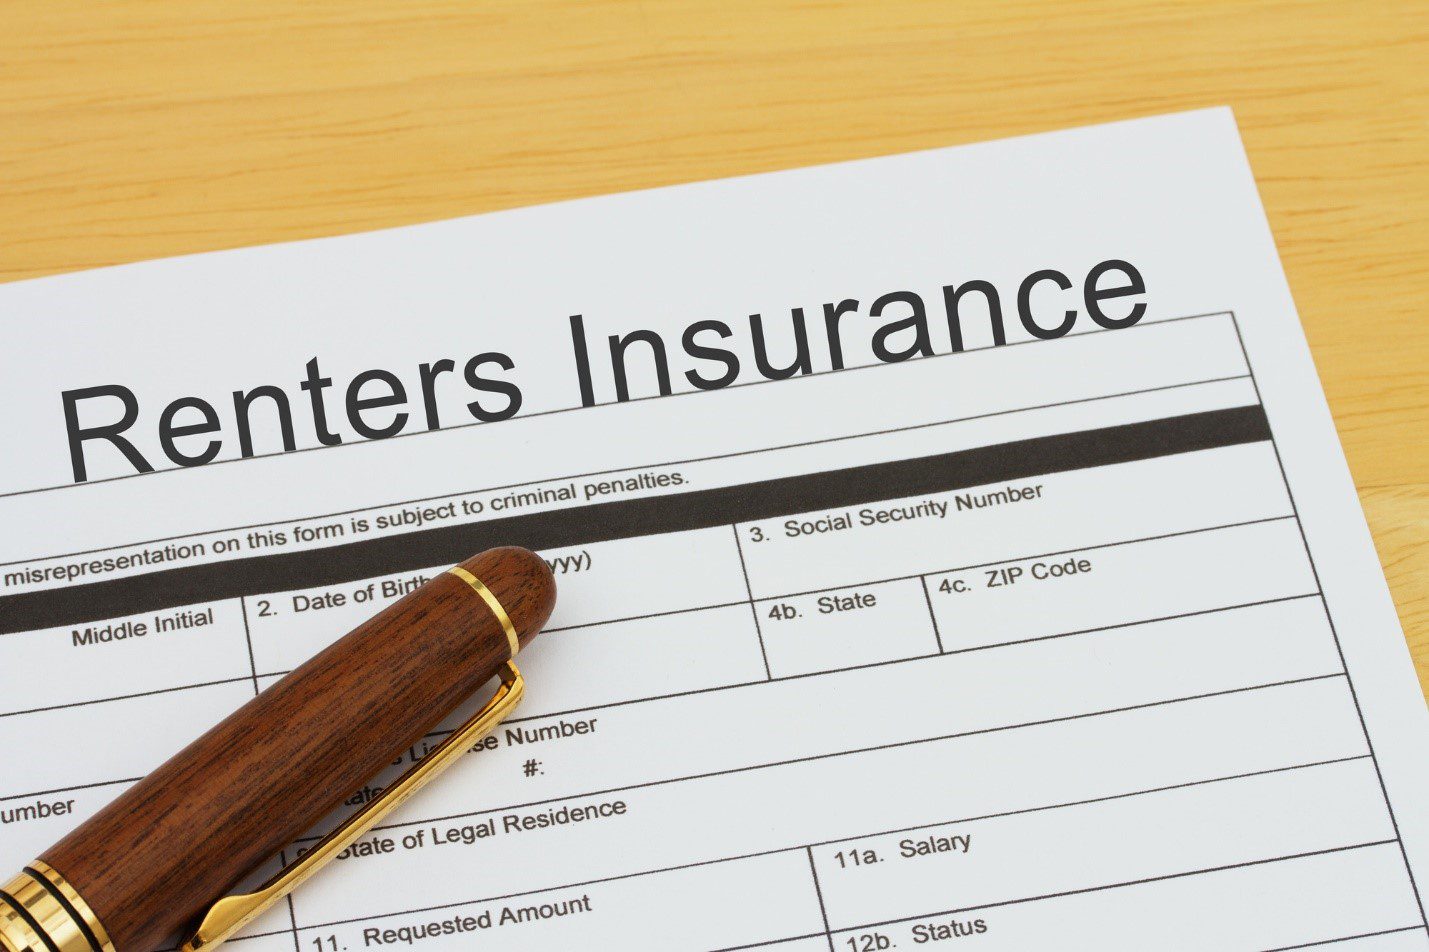 What is renter's insurance